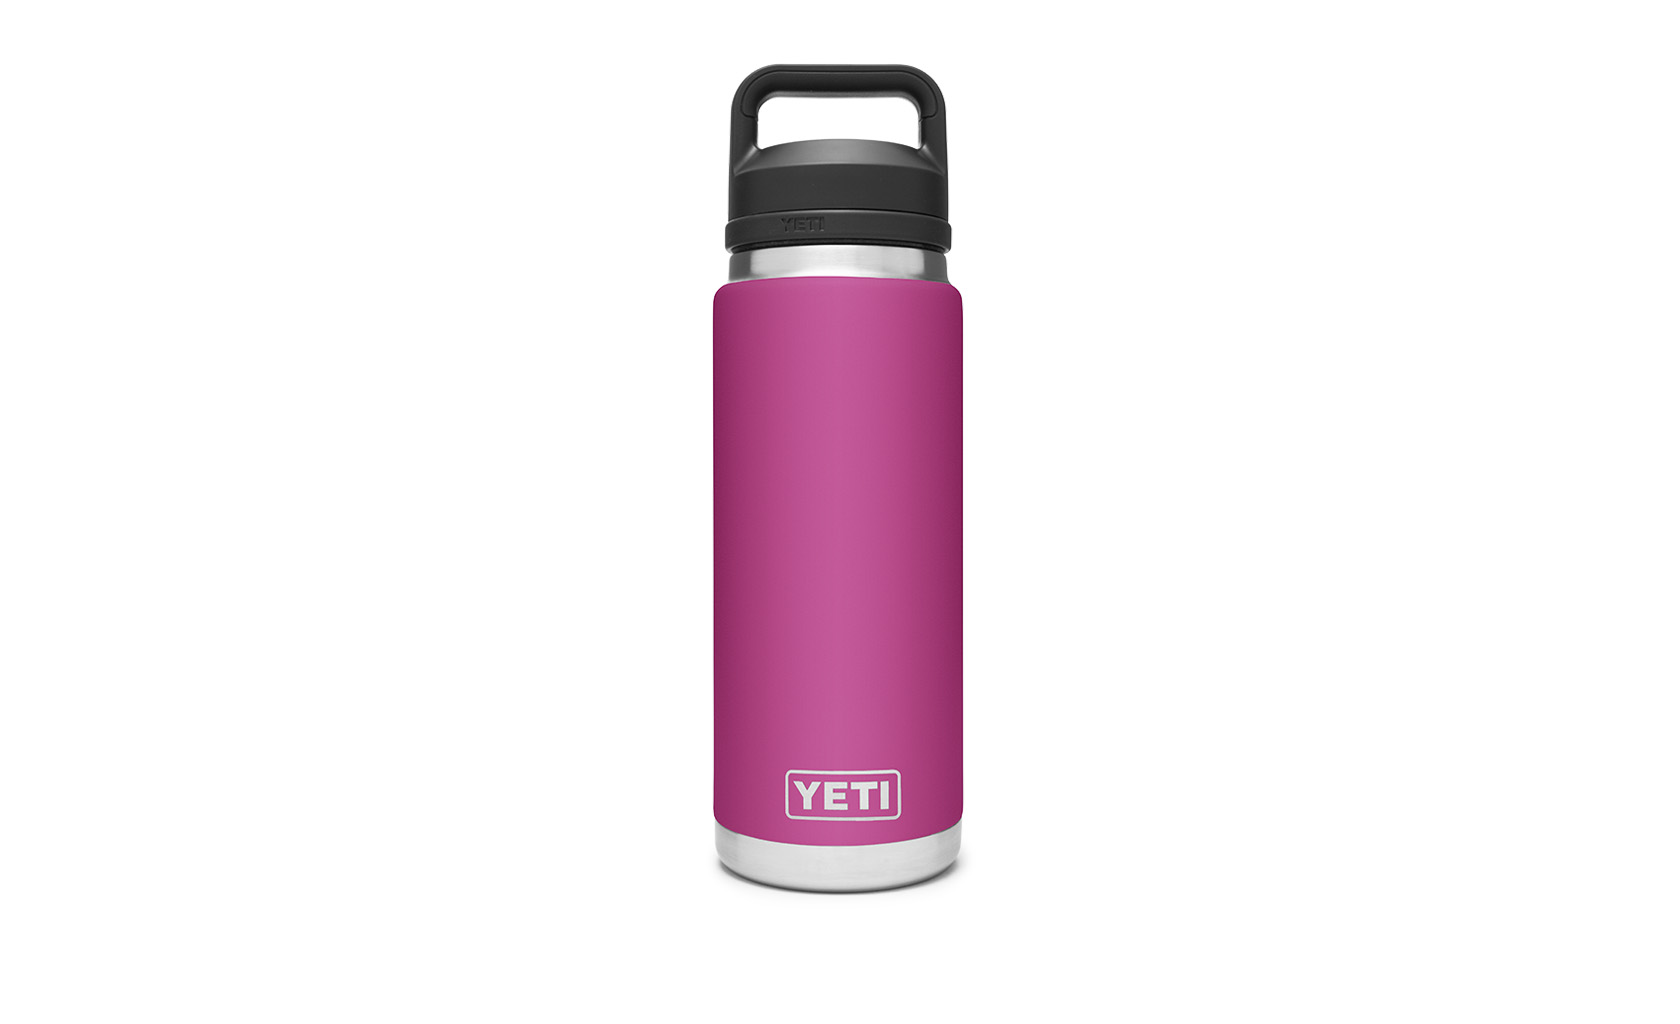 YETI / Rambler 26 oz Stackable Cup With Straw Lid - Prickly Pear Pink